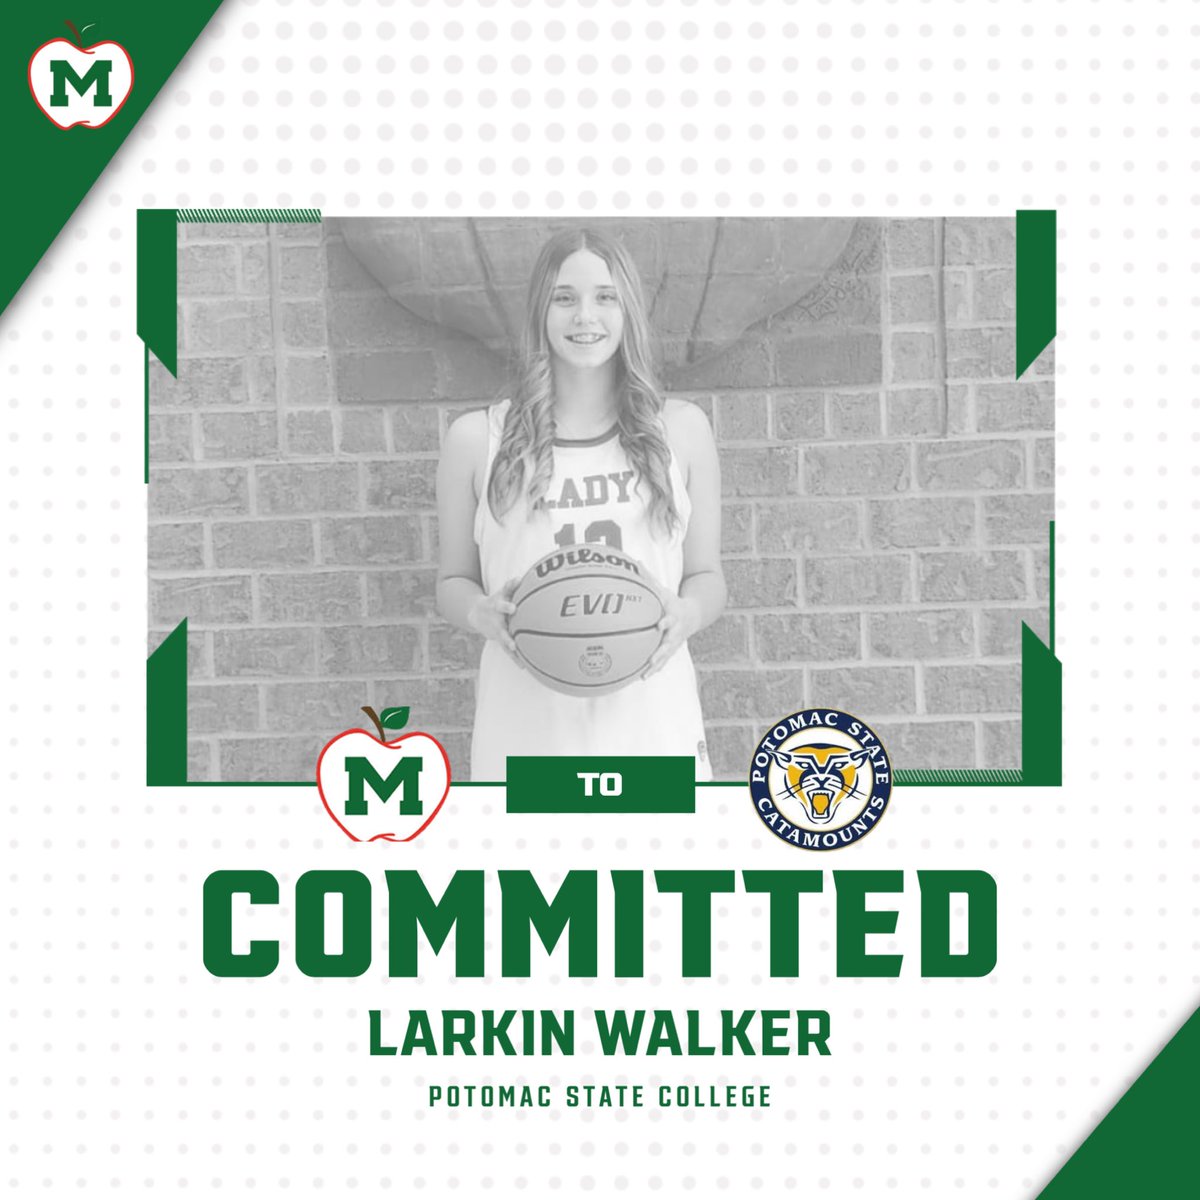 Congratulations to our senior Larkin Walker for continuing her basketball career at the collegiate level with Potomac State! Your Lady Applemen basketball family are proud of you! #nextplay 🍎🏀🍏